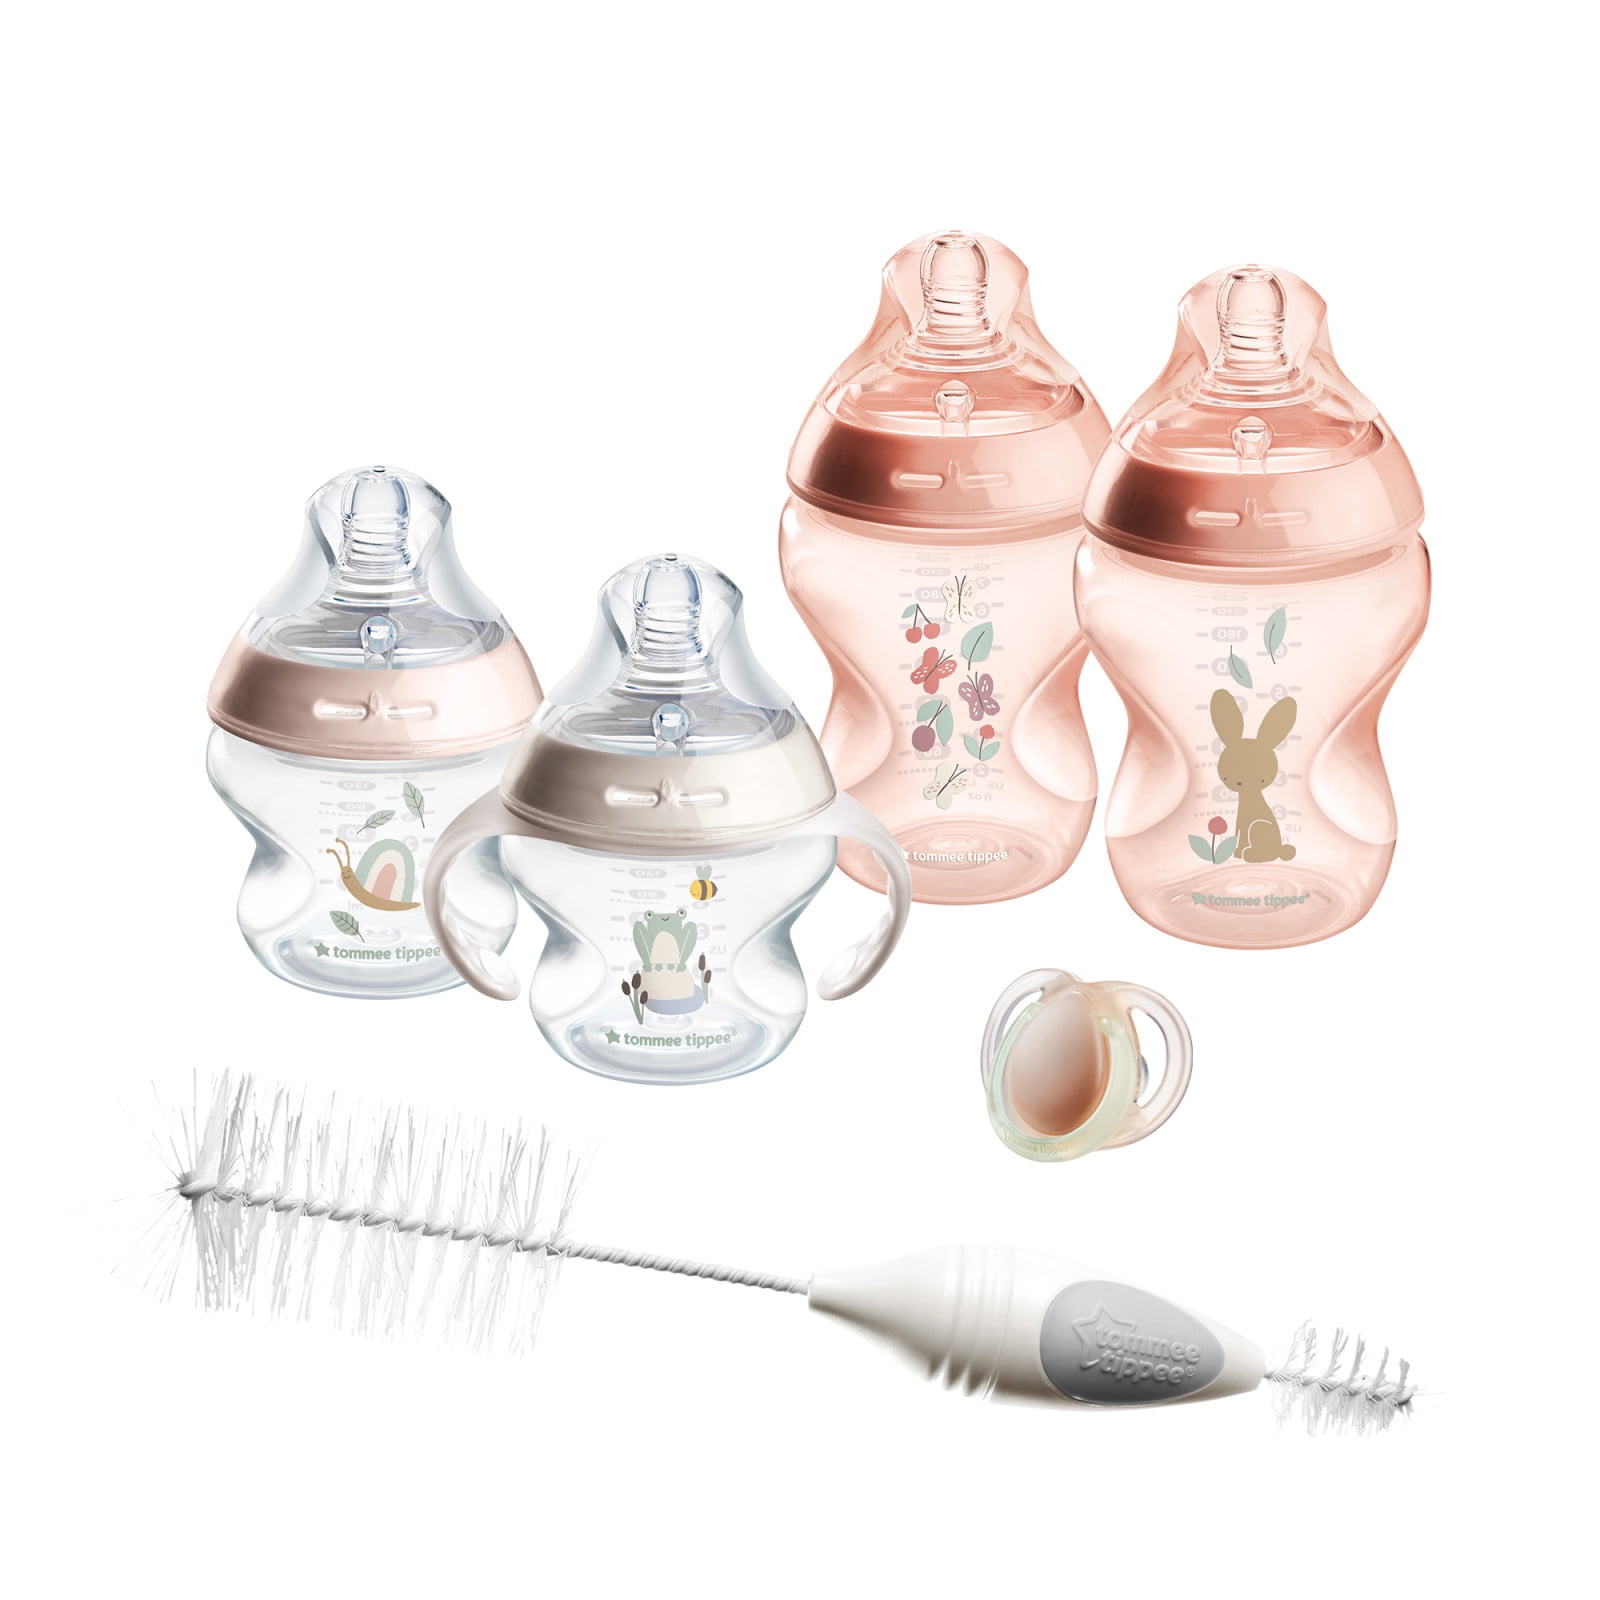 Tommee Tippee Natural Start Baby's First Bottle Set, 2 x 5oz and 2